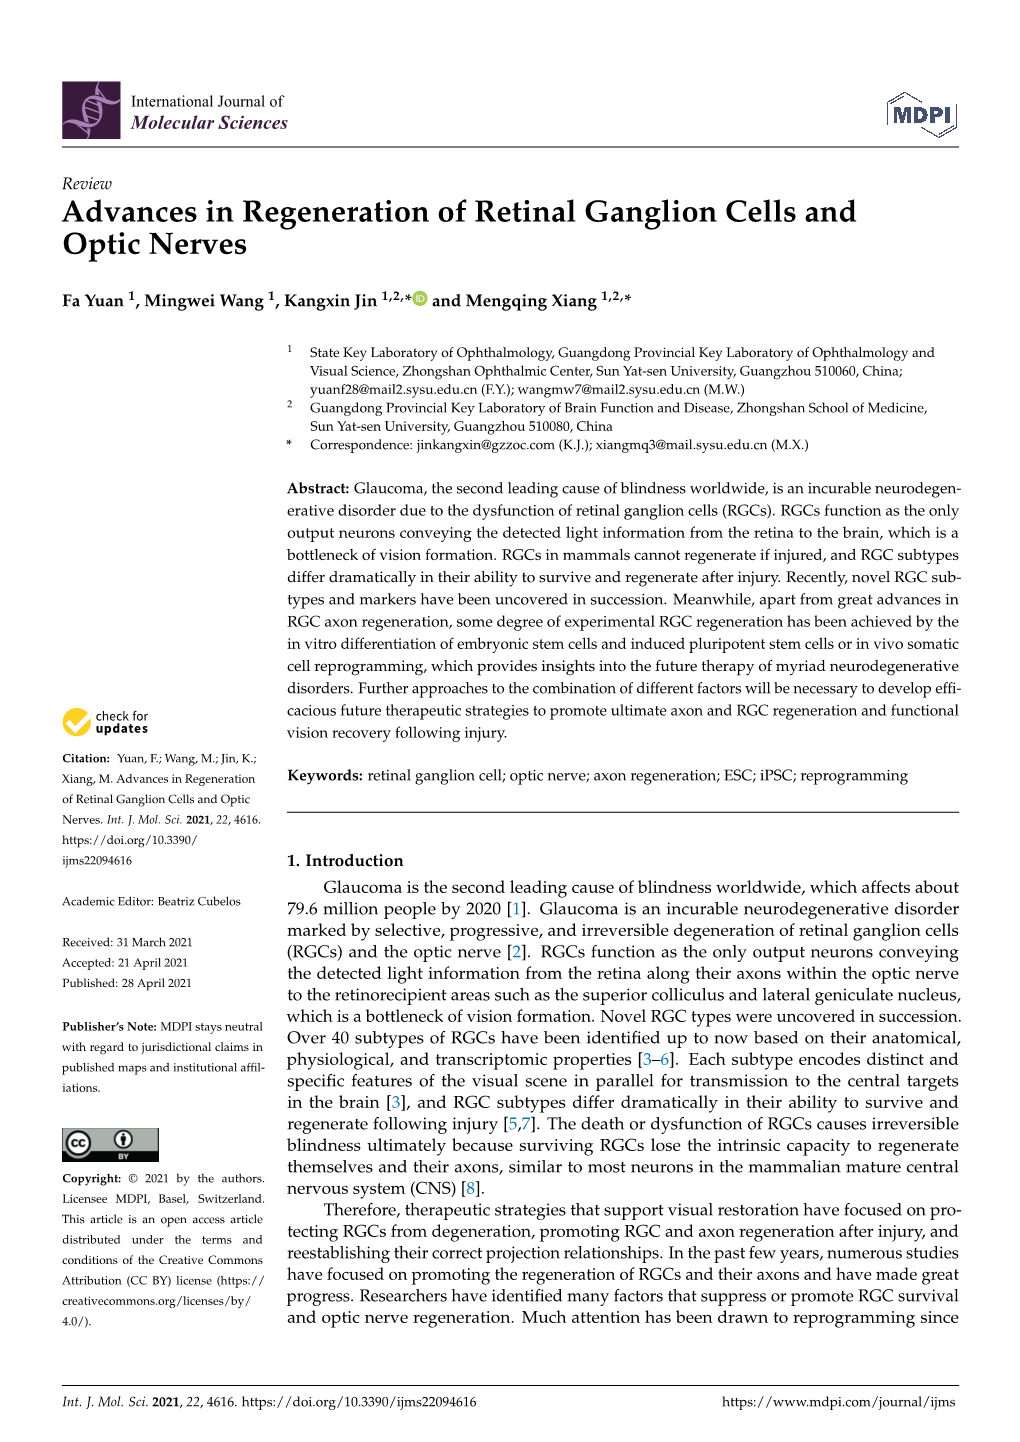 Advances in Regeneration of Retinal Ganglion Cells and Optic Nerves